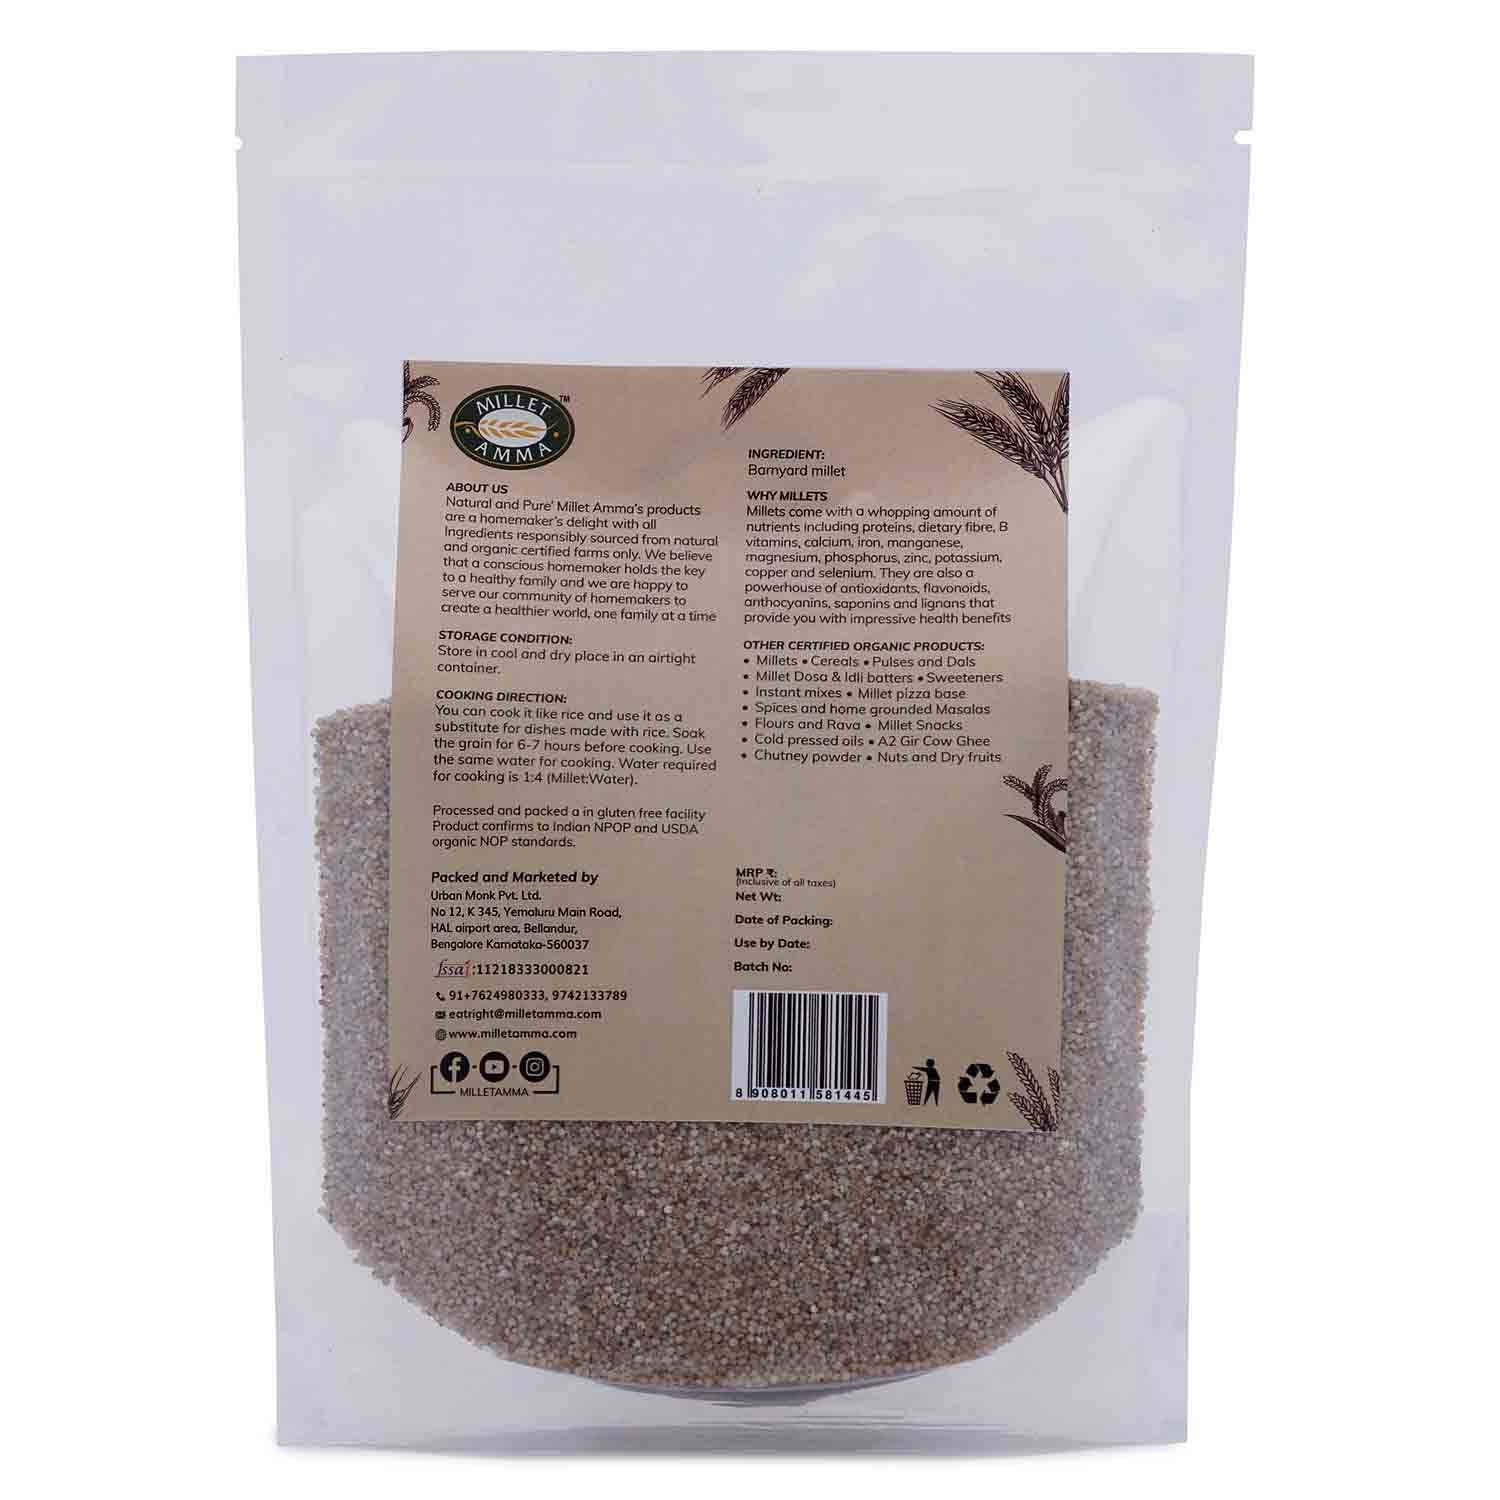 Millet Amma’s Organic Barnyard Millet Grains- Millet Amma’s Organic Barnyard Millet Grains are a rich source of dietary fibers.  Sourced with premium unpolished Barnyard Millets, it is a good source of fiber, iron, zinc and potassium.  Barnyard Millet is a known replacement for rice, you can use it to make all the dishes you normally use rice for. It is an ideal option for people following a millet diet; it also aids in weight management.